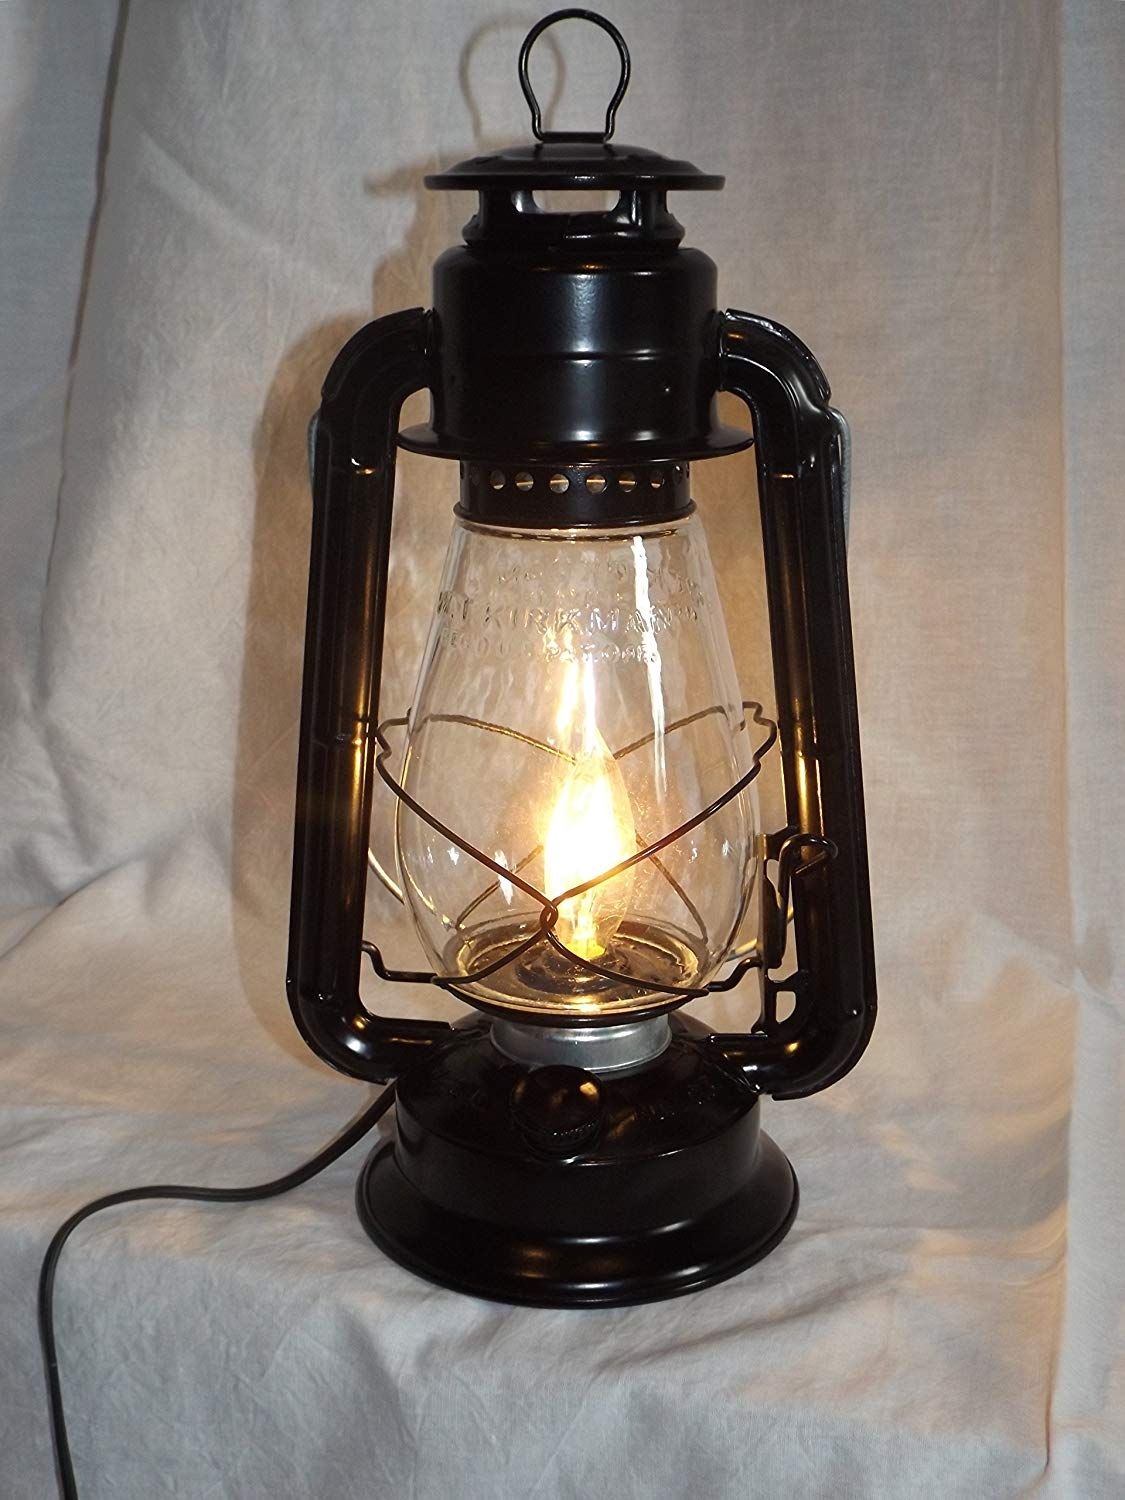 Dietz Junior 'vintage Style' Electric Lantern Table Lamp – Black Intended For Rustic Outdoor Electric Lanterns (View 19 of 20)